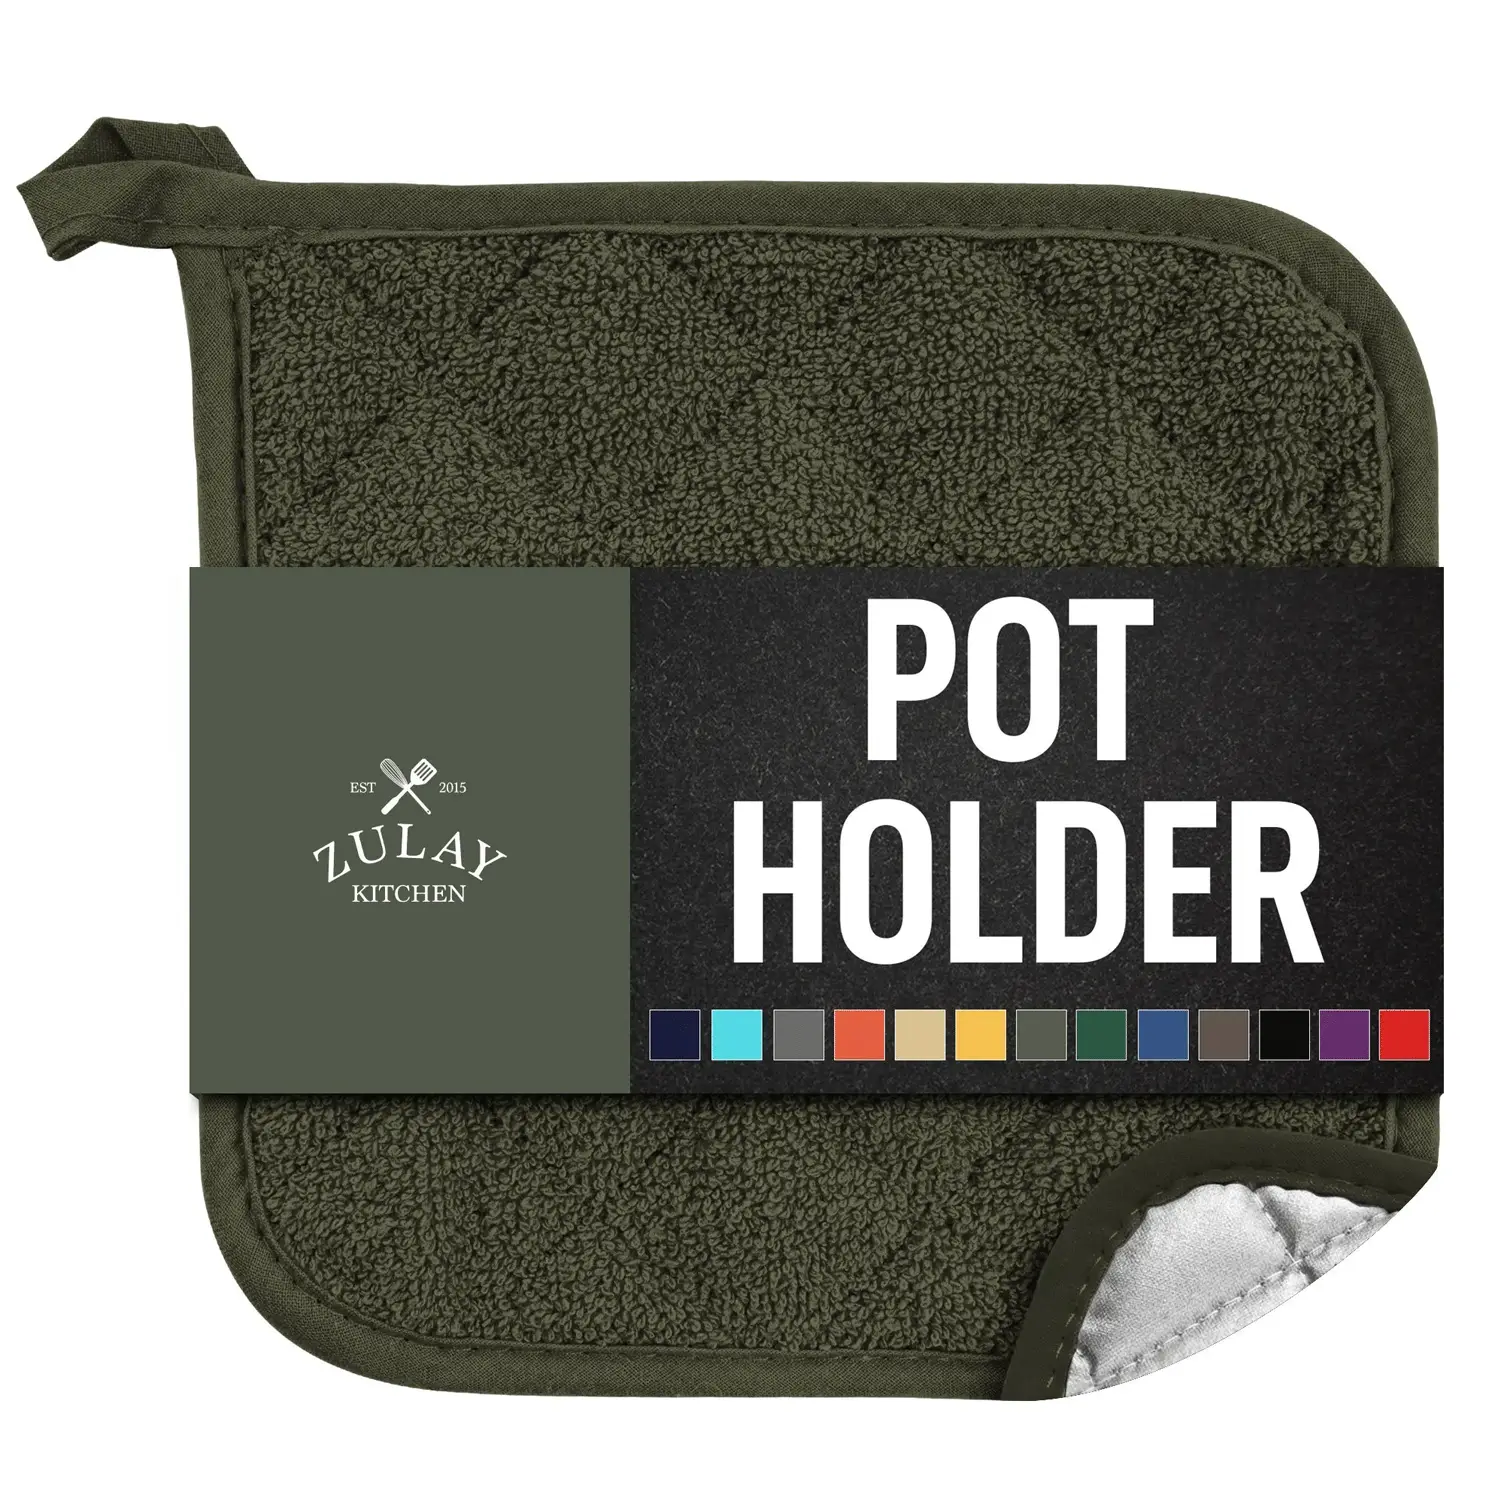 Pot Holder - Single Pack Quilted Terry Cloth Pot holders 7x7 Inch